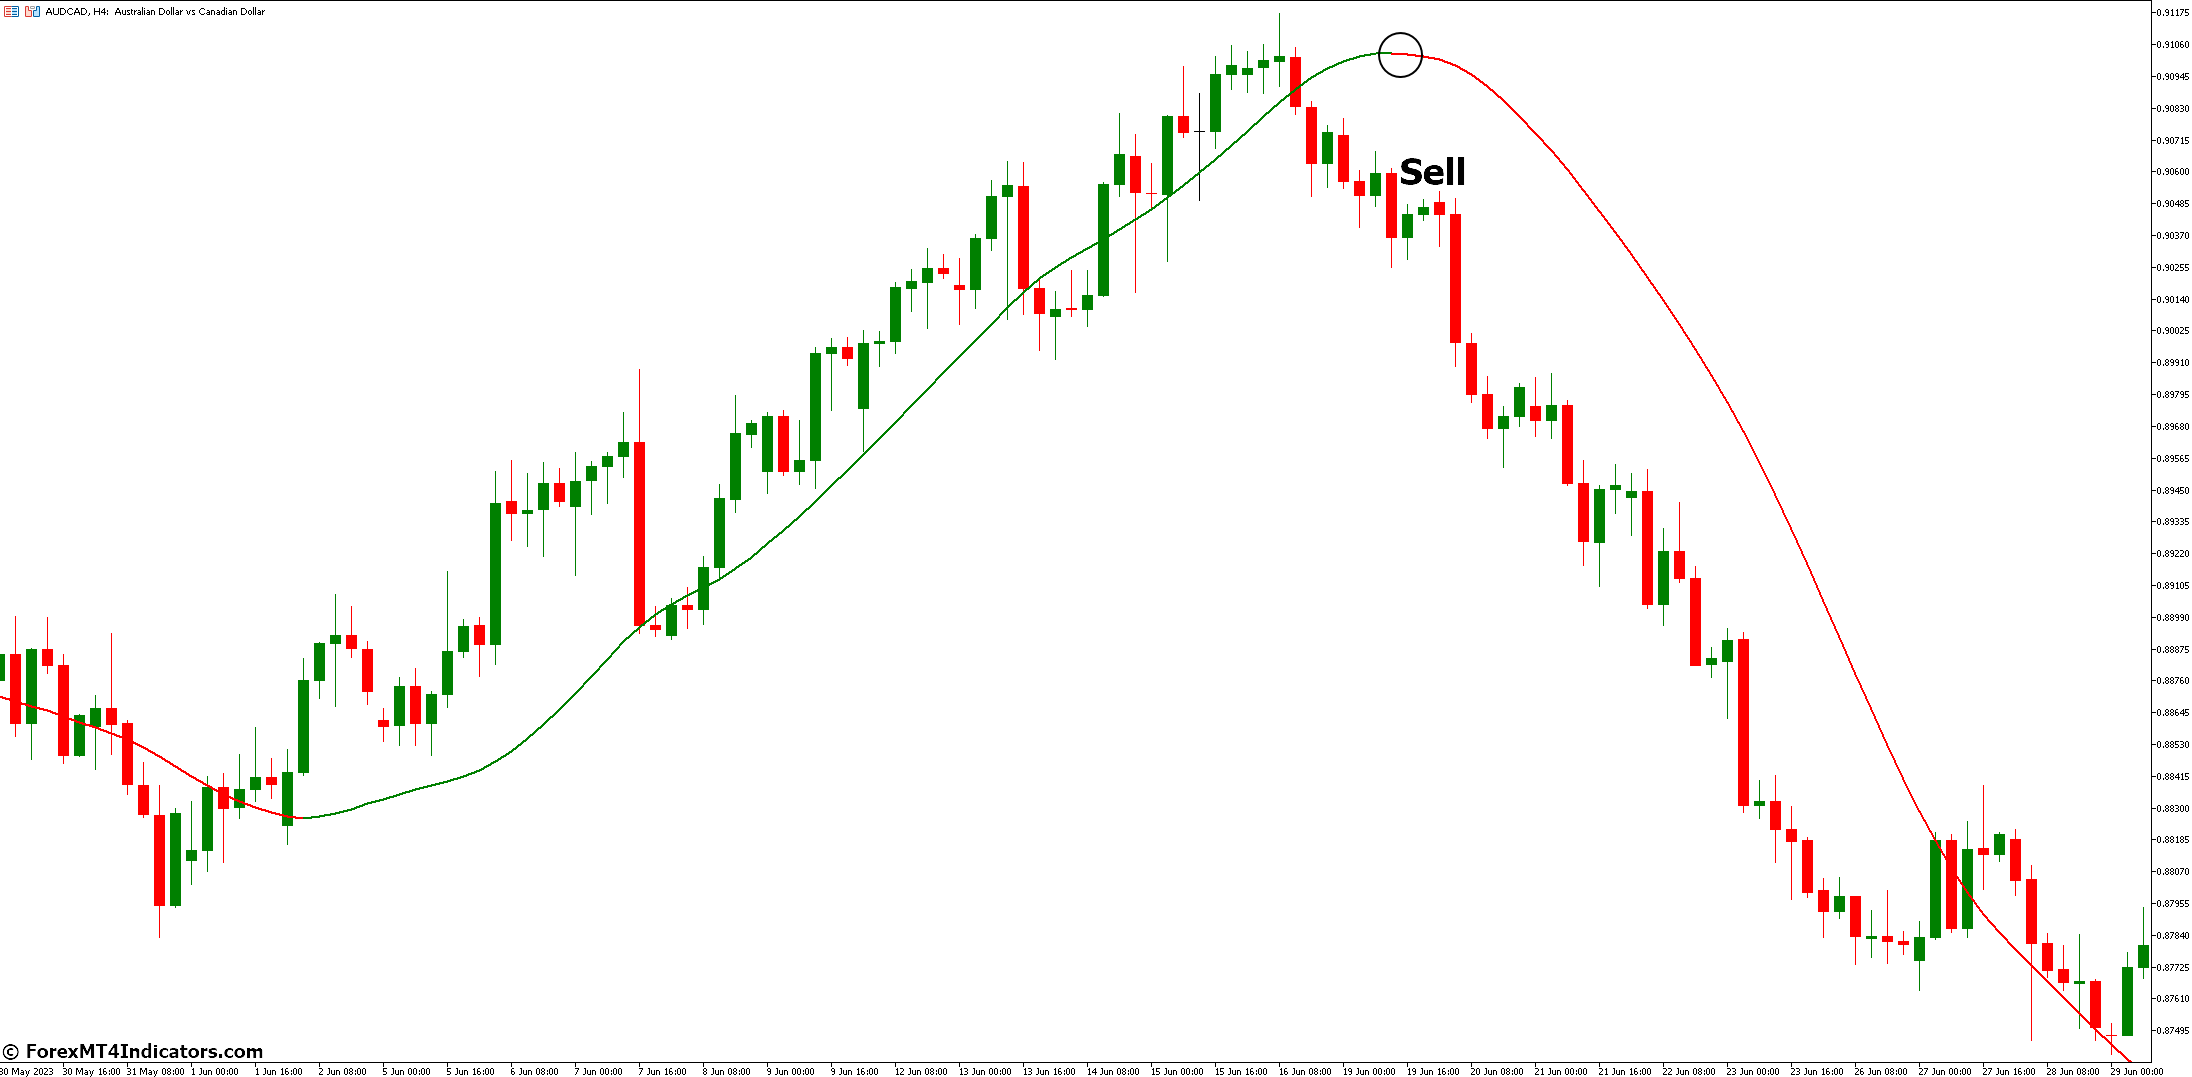 How to Trade with Slope Direction Line Indicator - Sell Entry